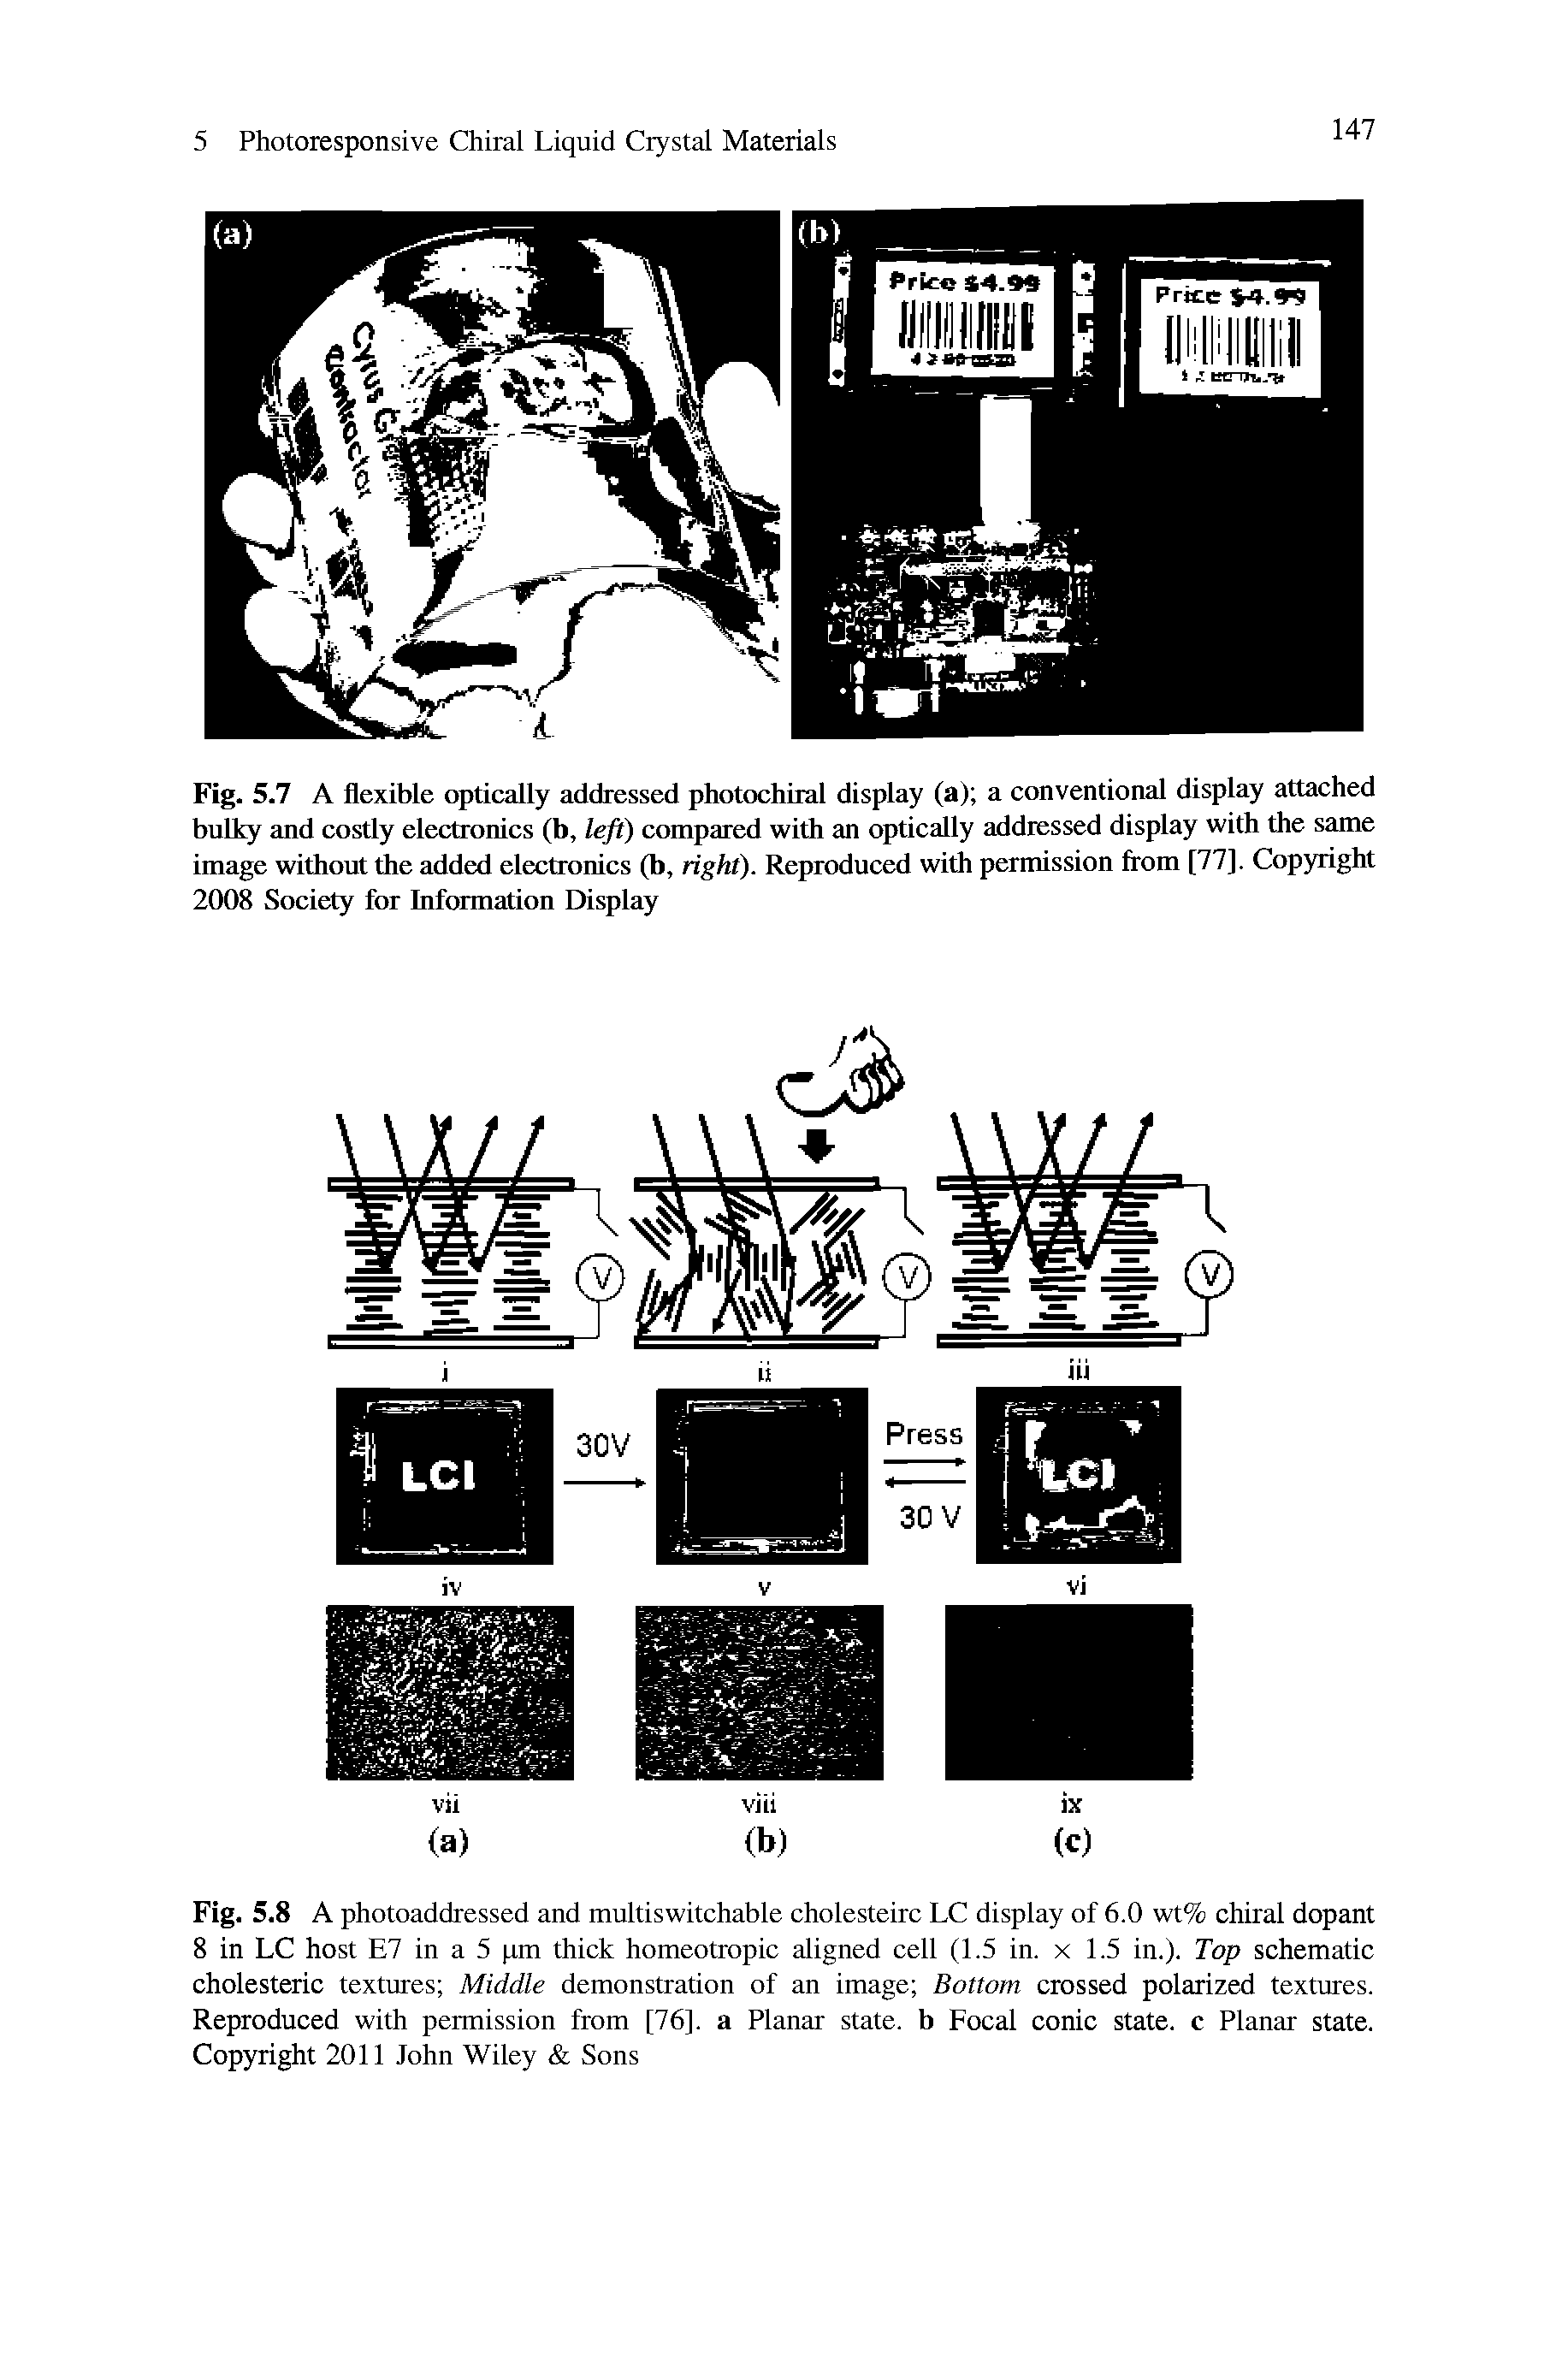 Fig. 5.7 A flexible optically addressed photoehiral display (a) a conventional display attached bulky and costly electronics (b, left) compared with an optically addressed display with the same image without the added eleetronies (b, right). Reproduced with permission from [77]. Copyright 2008 Society for Information Display...